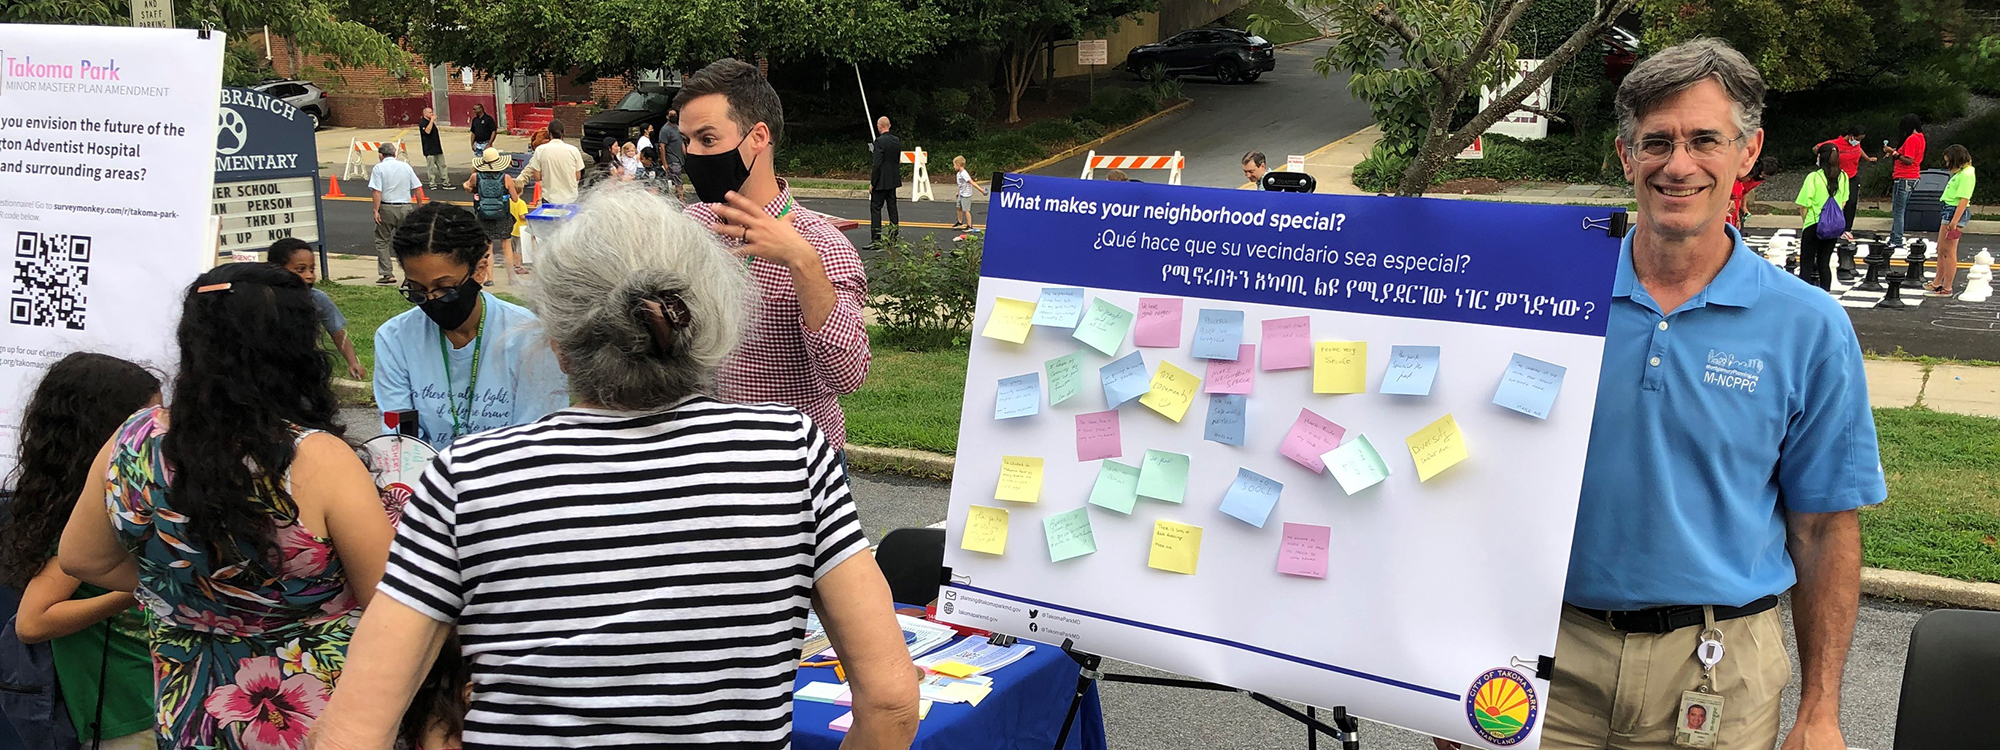 The image shows a man standing behind a sign at Takoma Park's National Night Out event that says "What makes your neighborhood special?" written in multiple languages and has sticky notes on it. The City of Takoma Park seal is located at the bottom right corner of the sign. To the man's left, another man is talking to event attendees from behind a booth.